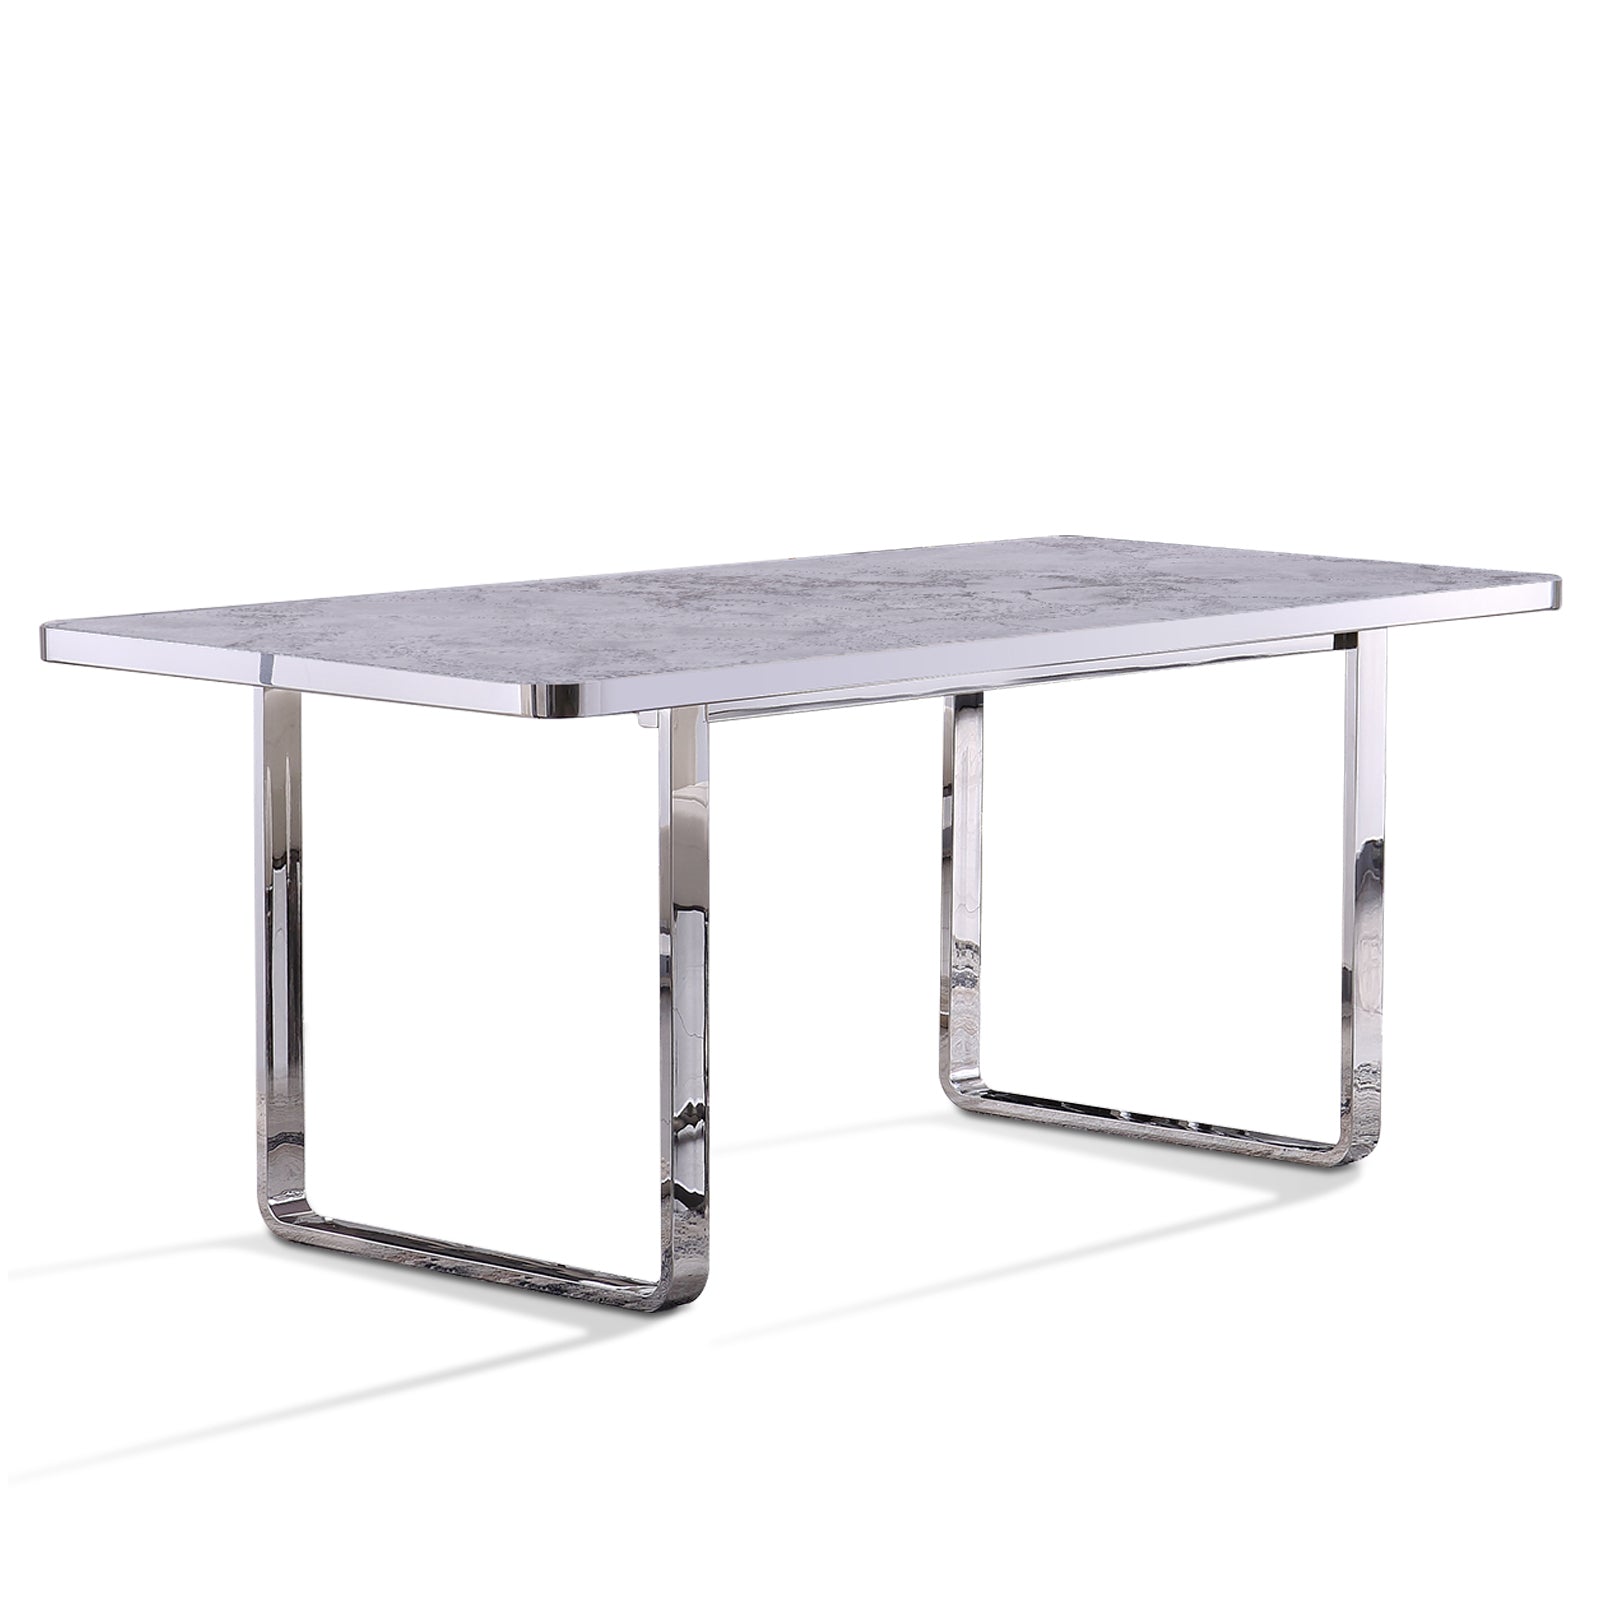 The Elegance of a Silver Dining Table with a Unique Slate Tabletop